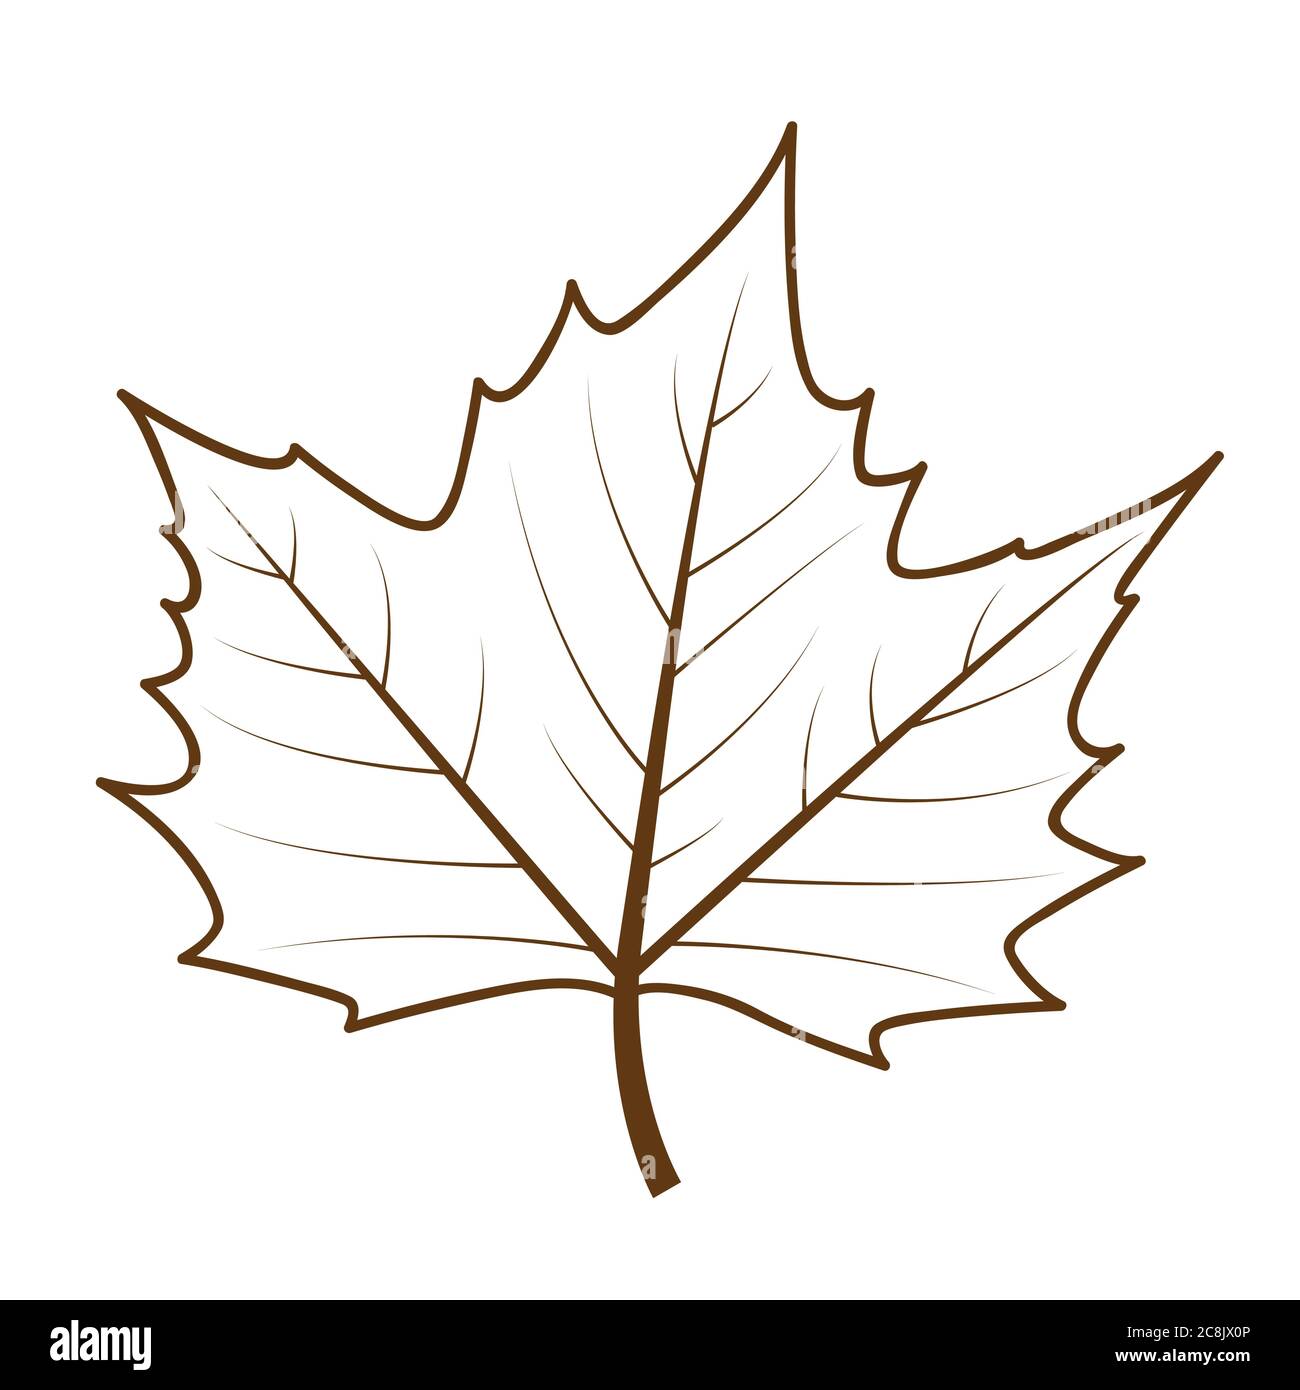 How to Draw a Maple Leaf with Markers - Smiling Colors